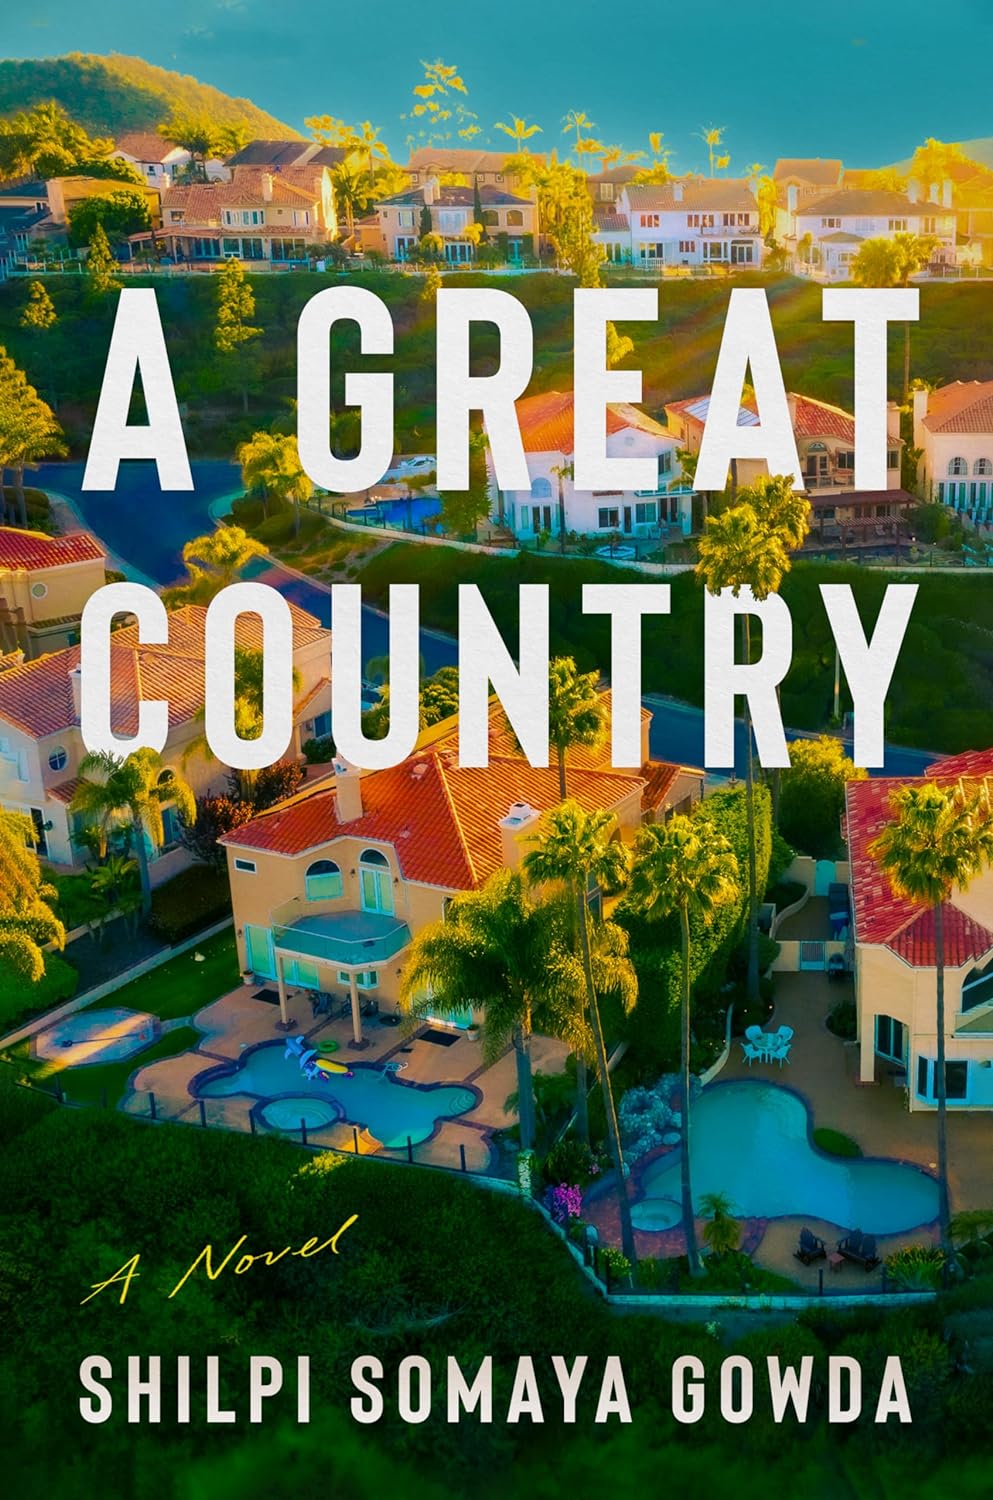 Image for "A Great Country"